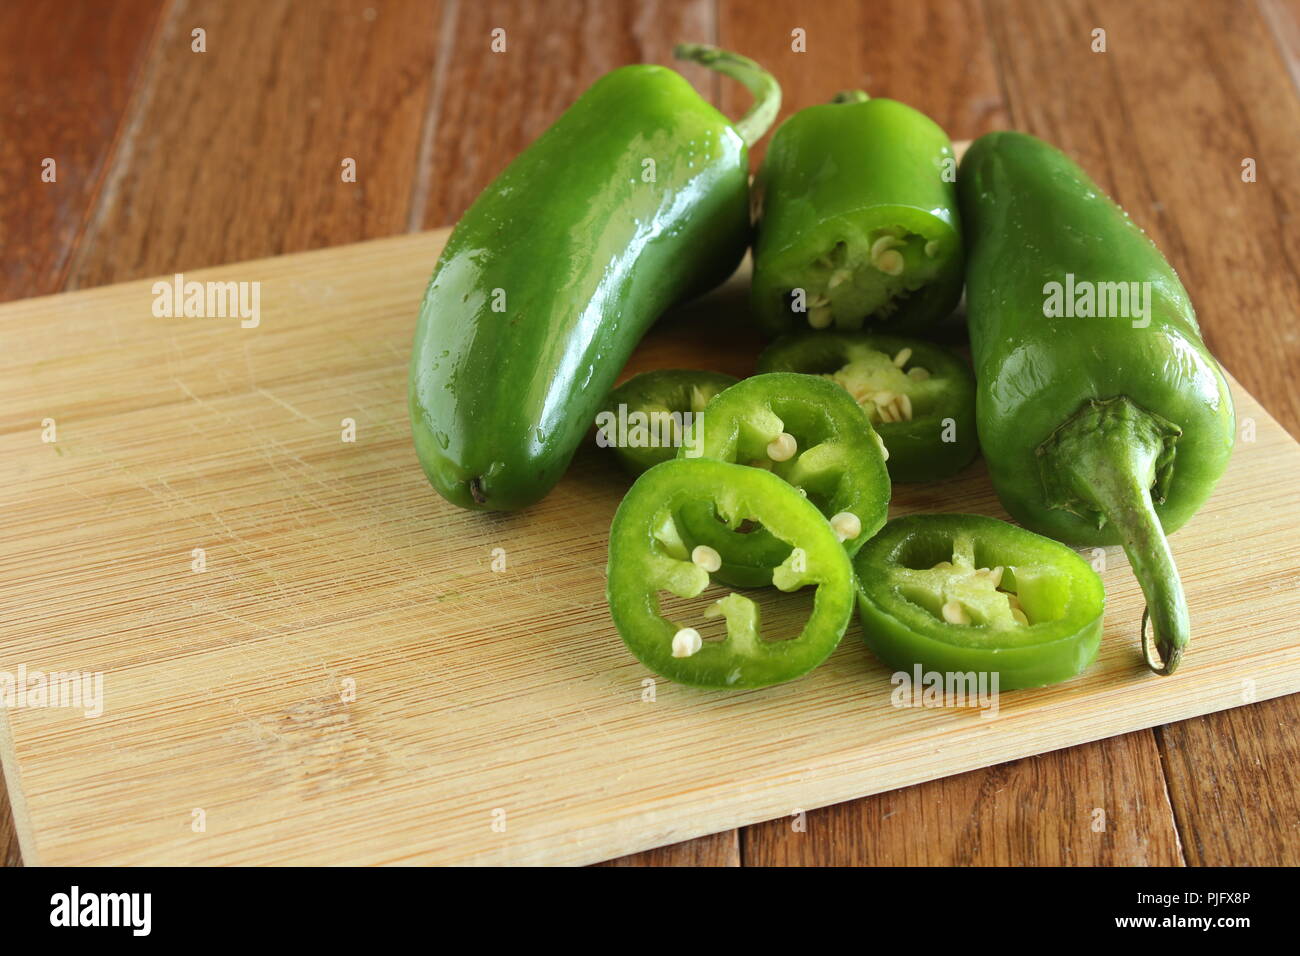 fresh jalapeños sliced on a wooden cutting board Stock Photo